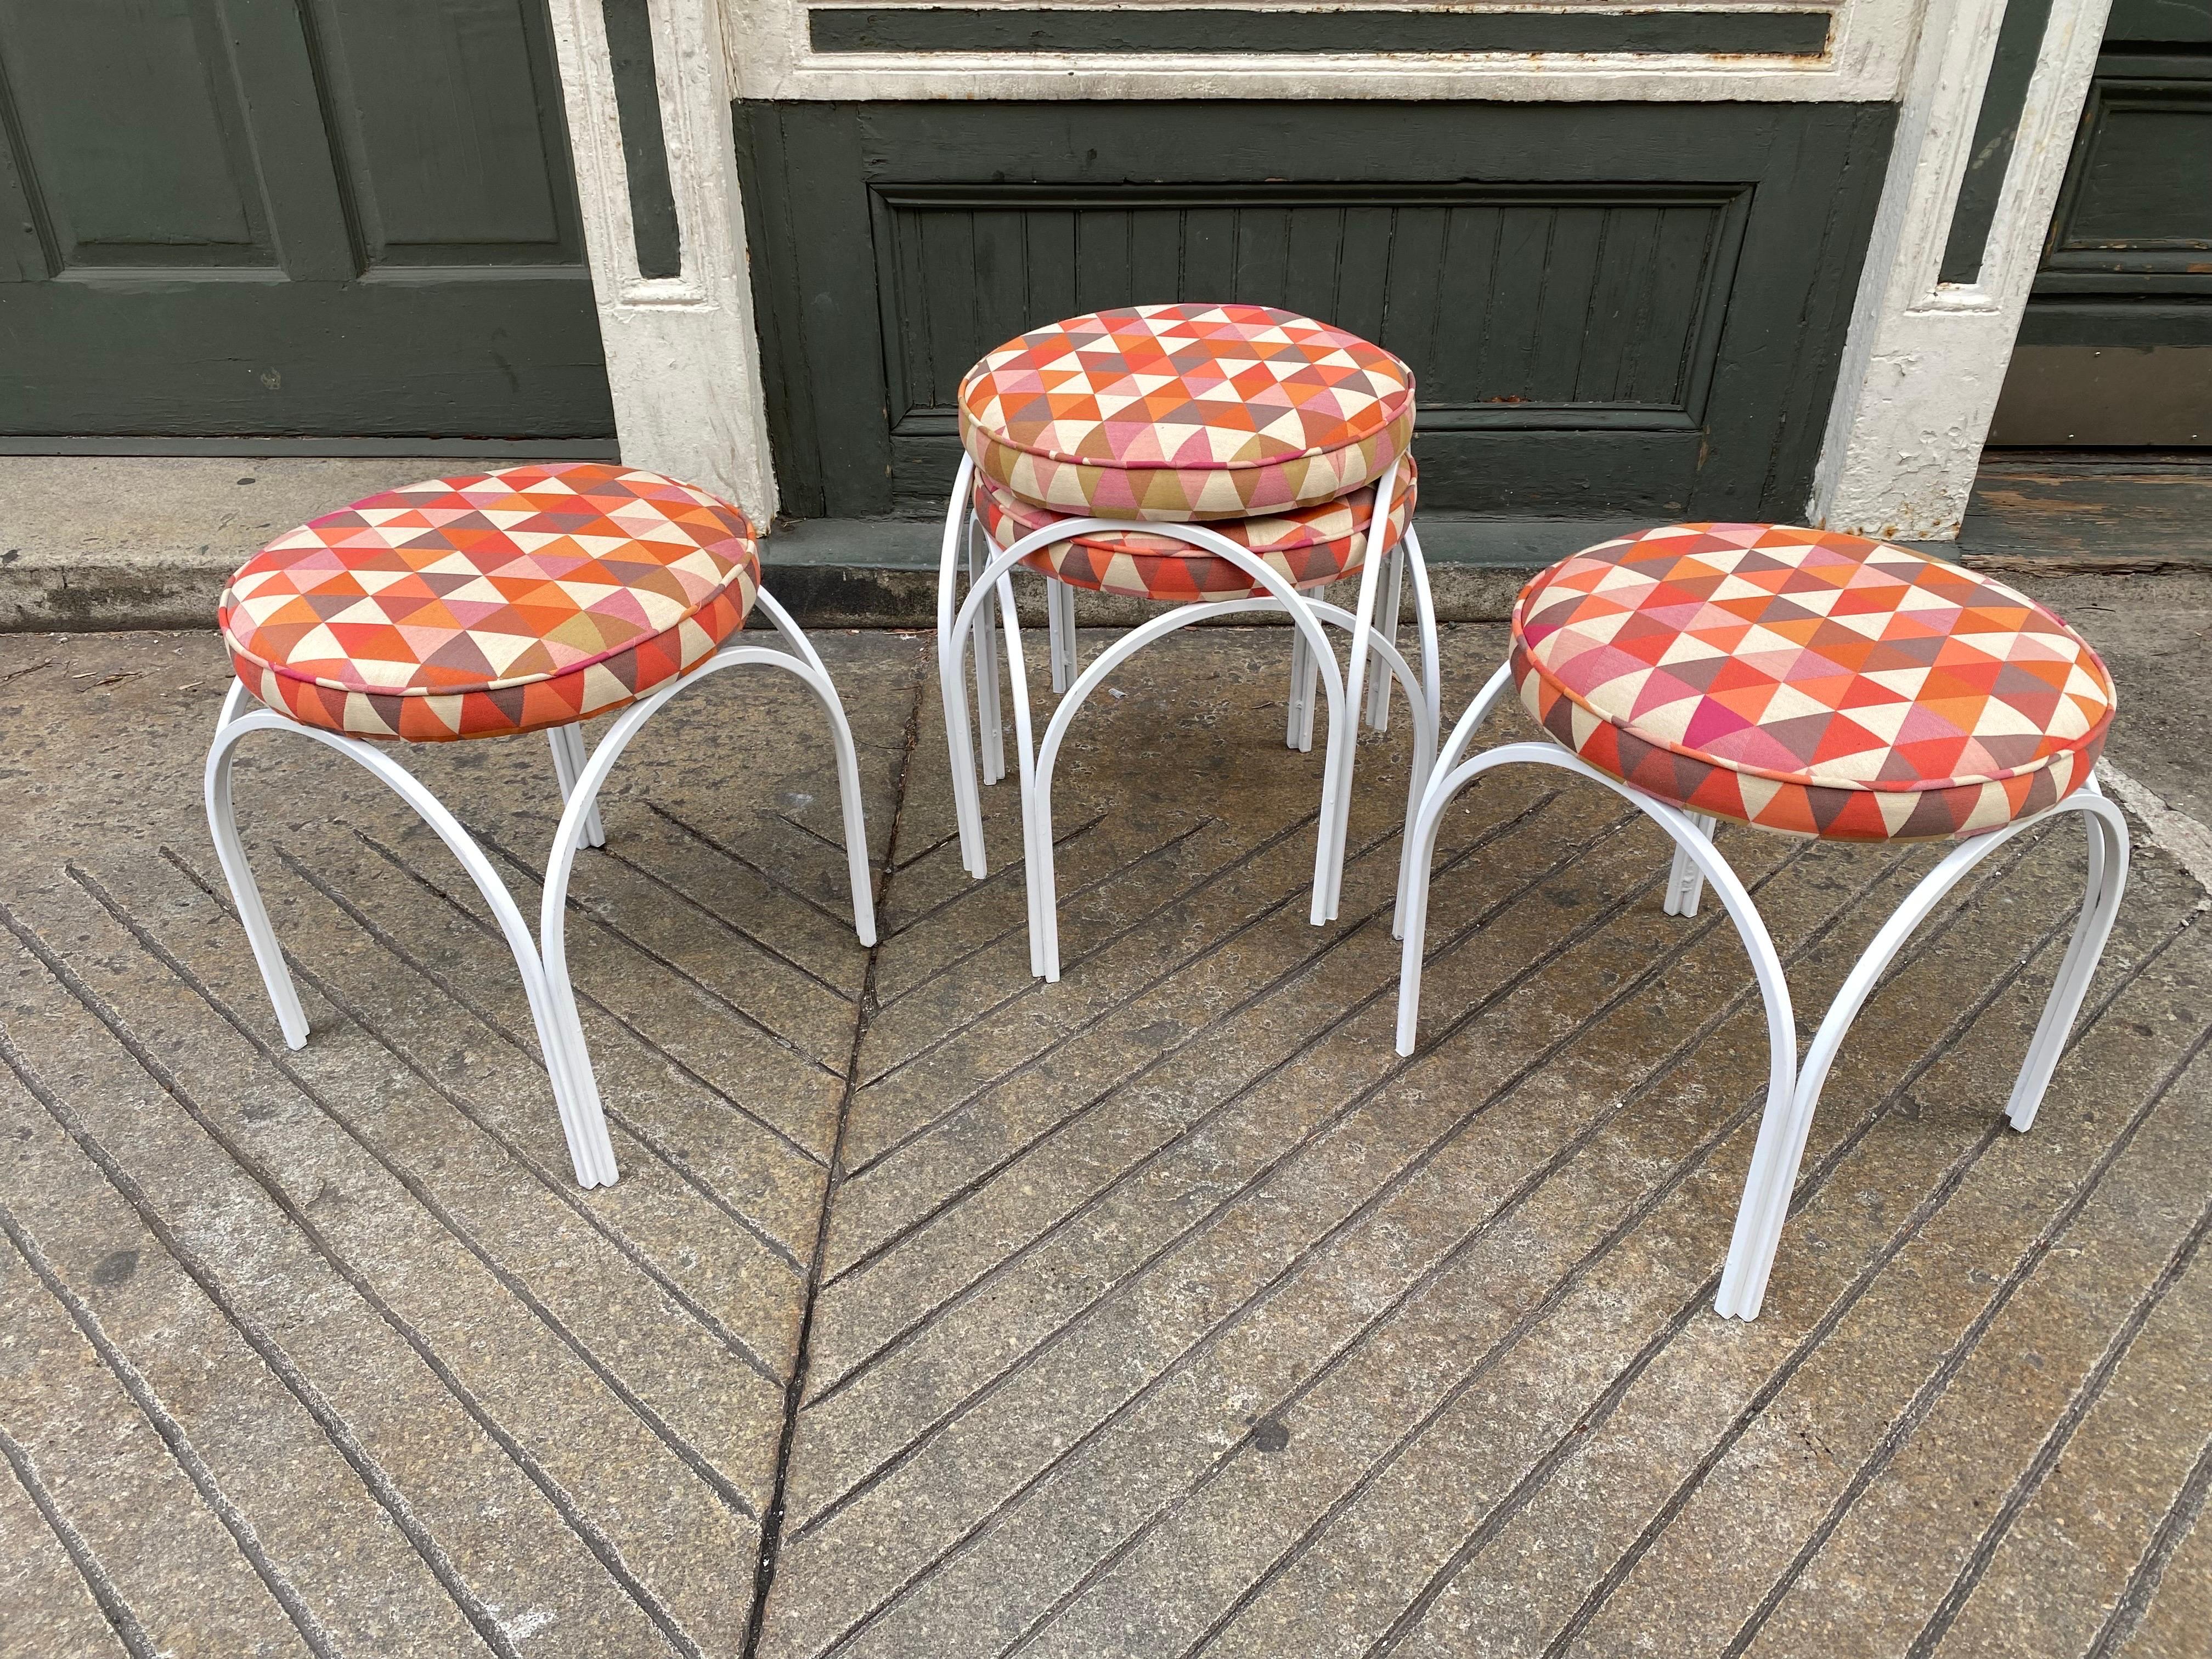 Set of 4 Frederic Weinberg stools. Newly upholstered and frames repainted. Nice Set, easy to move around and they can stack!